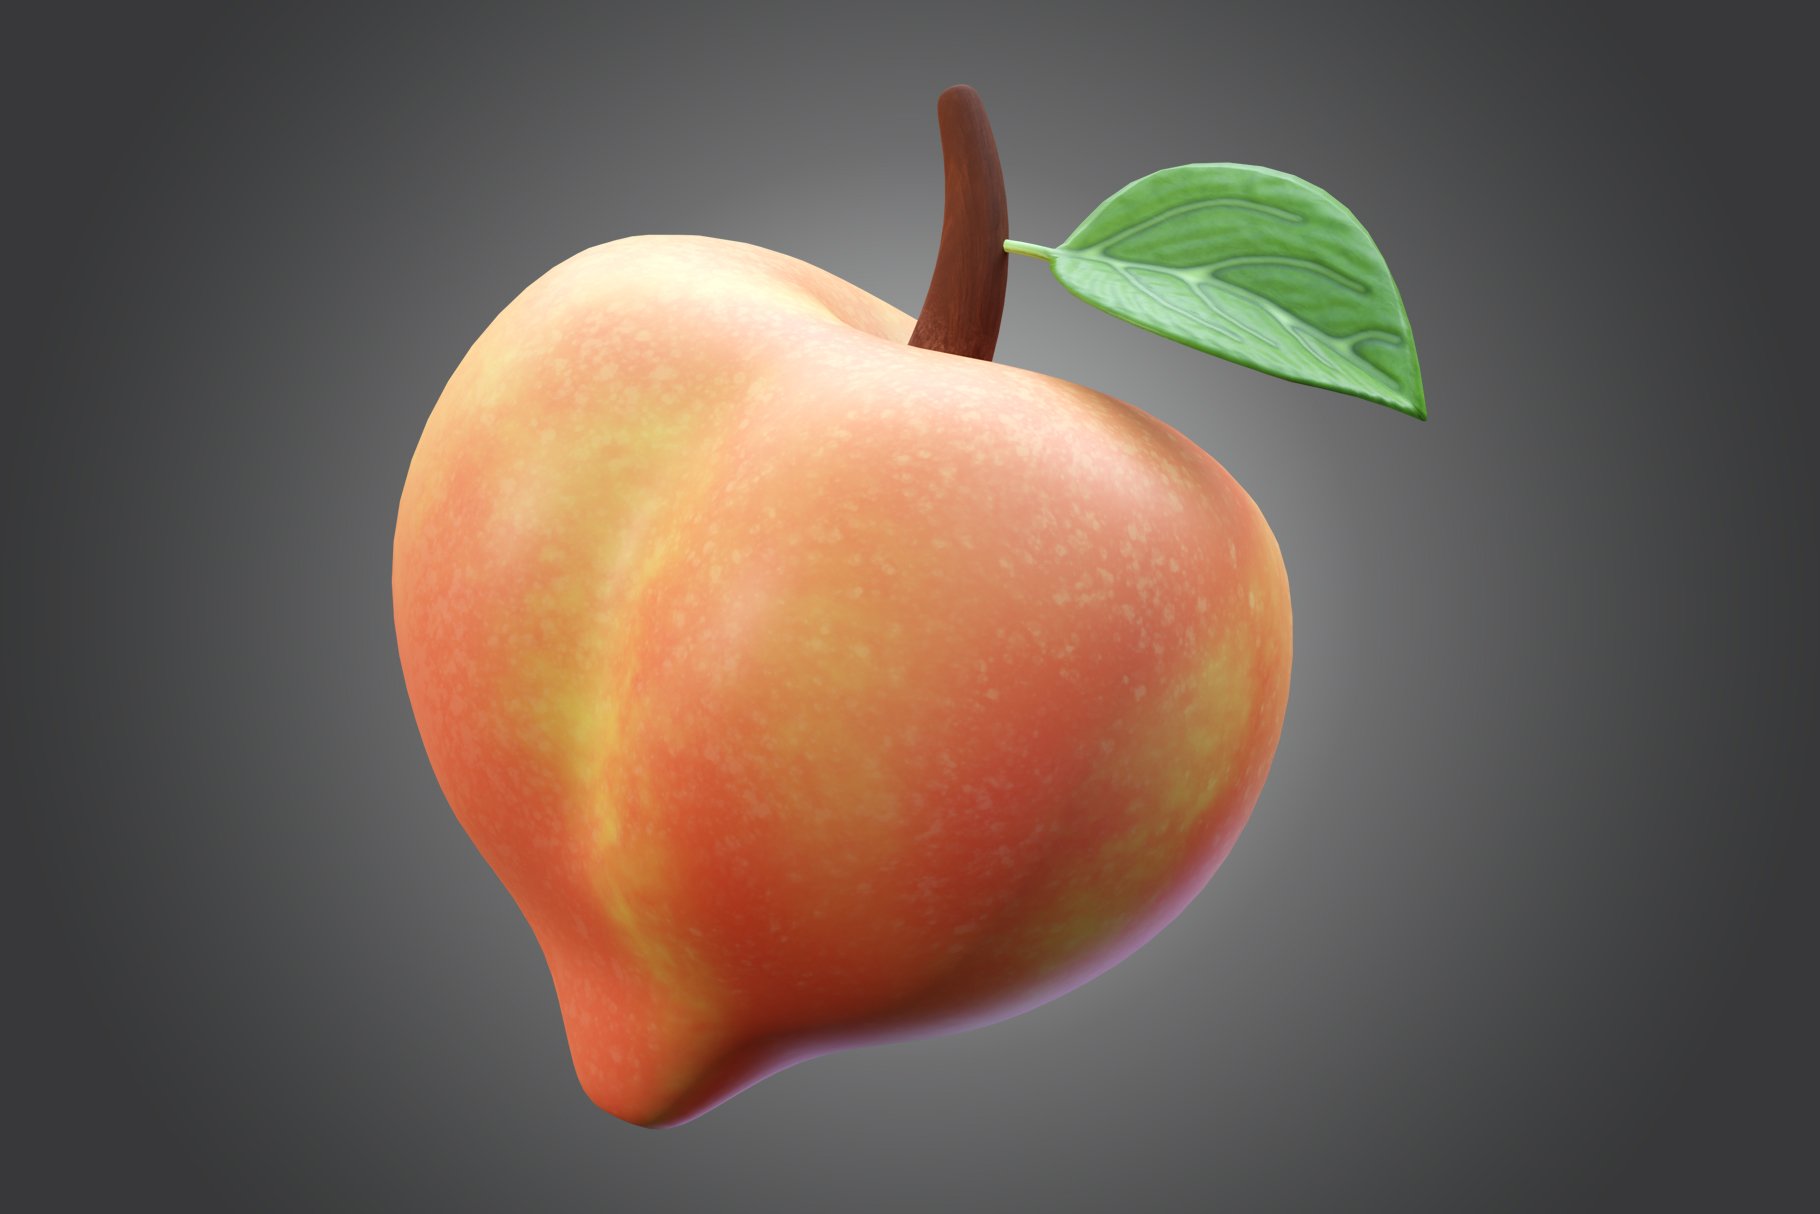 Image of a peach with a twig.